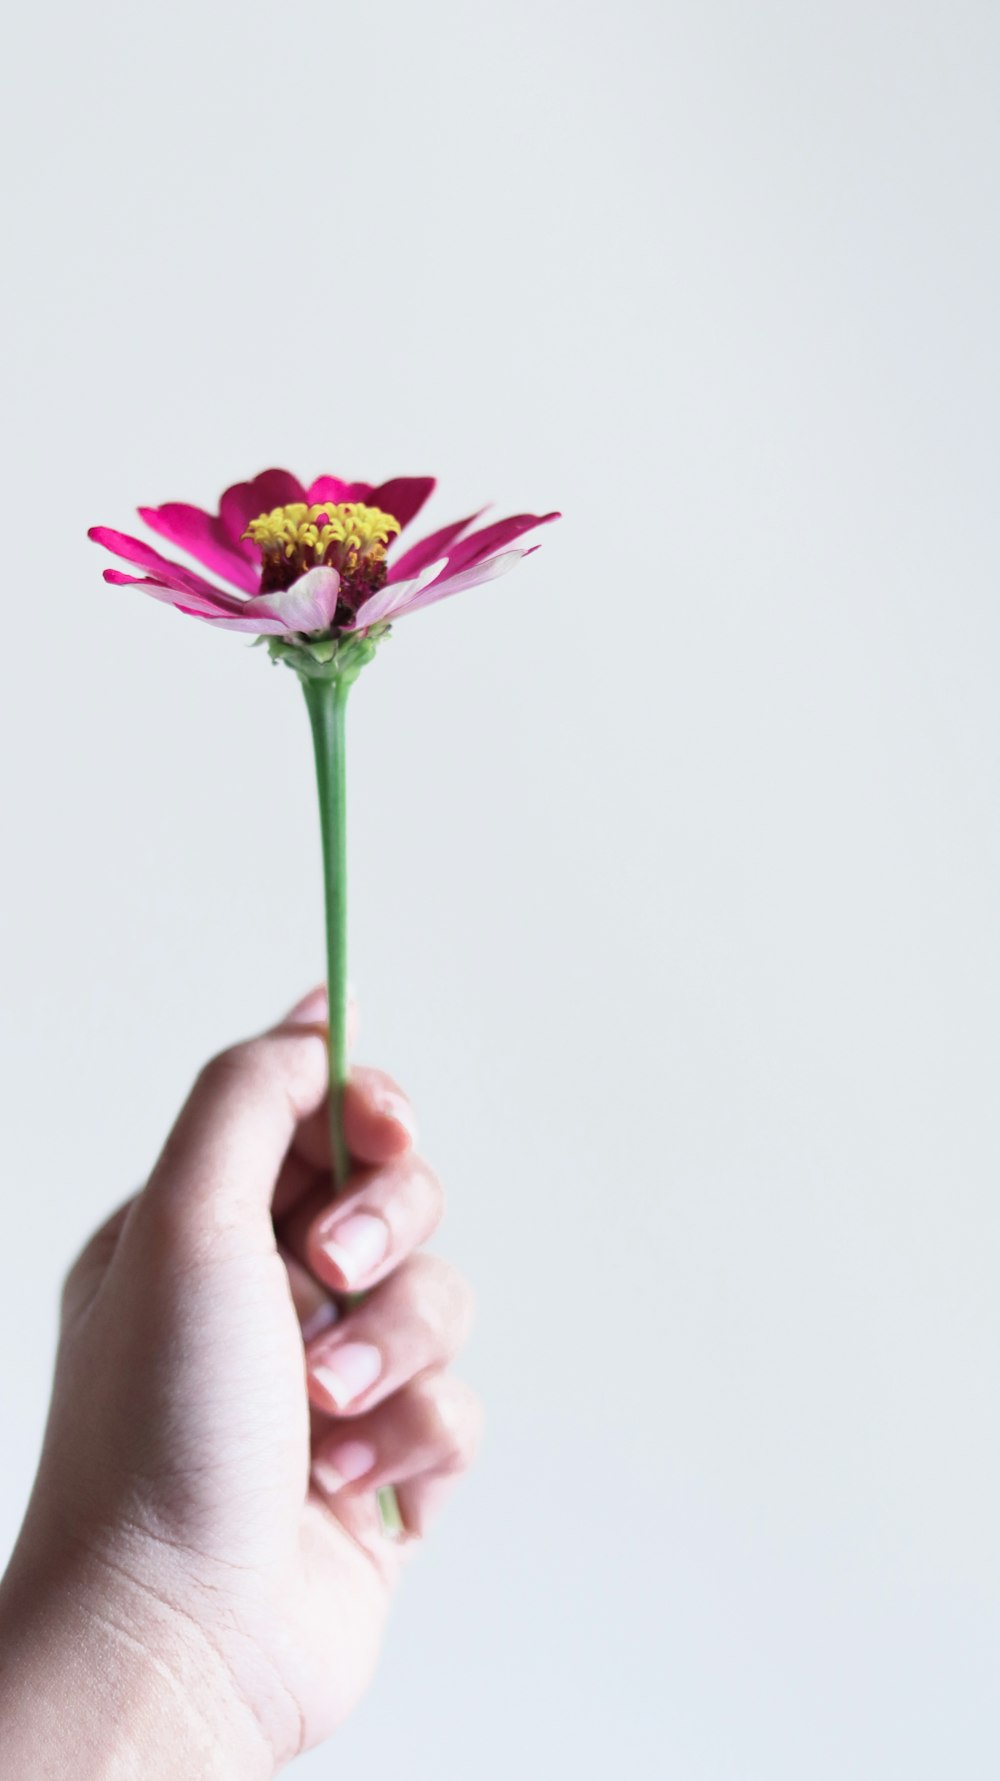 person holding pink flower